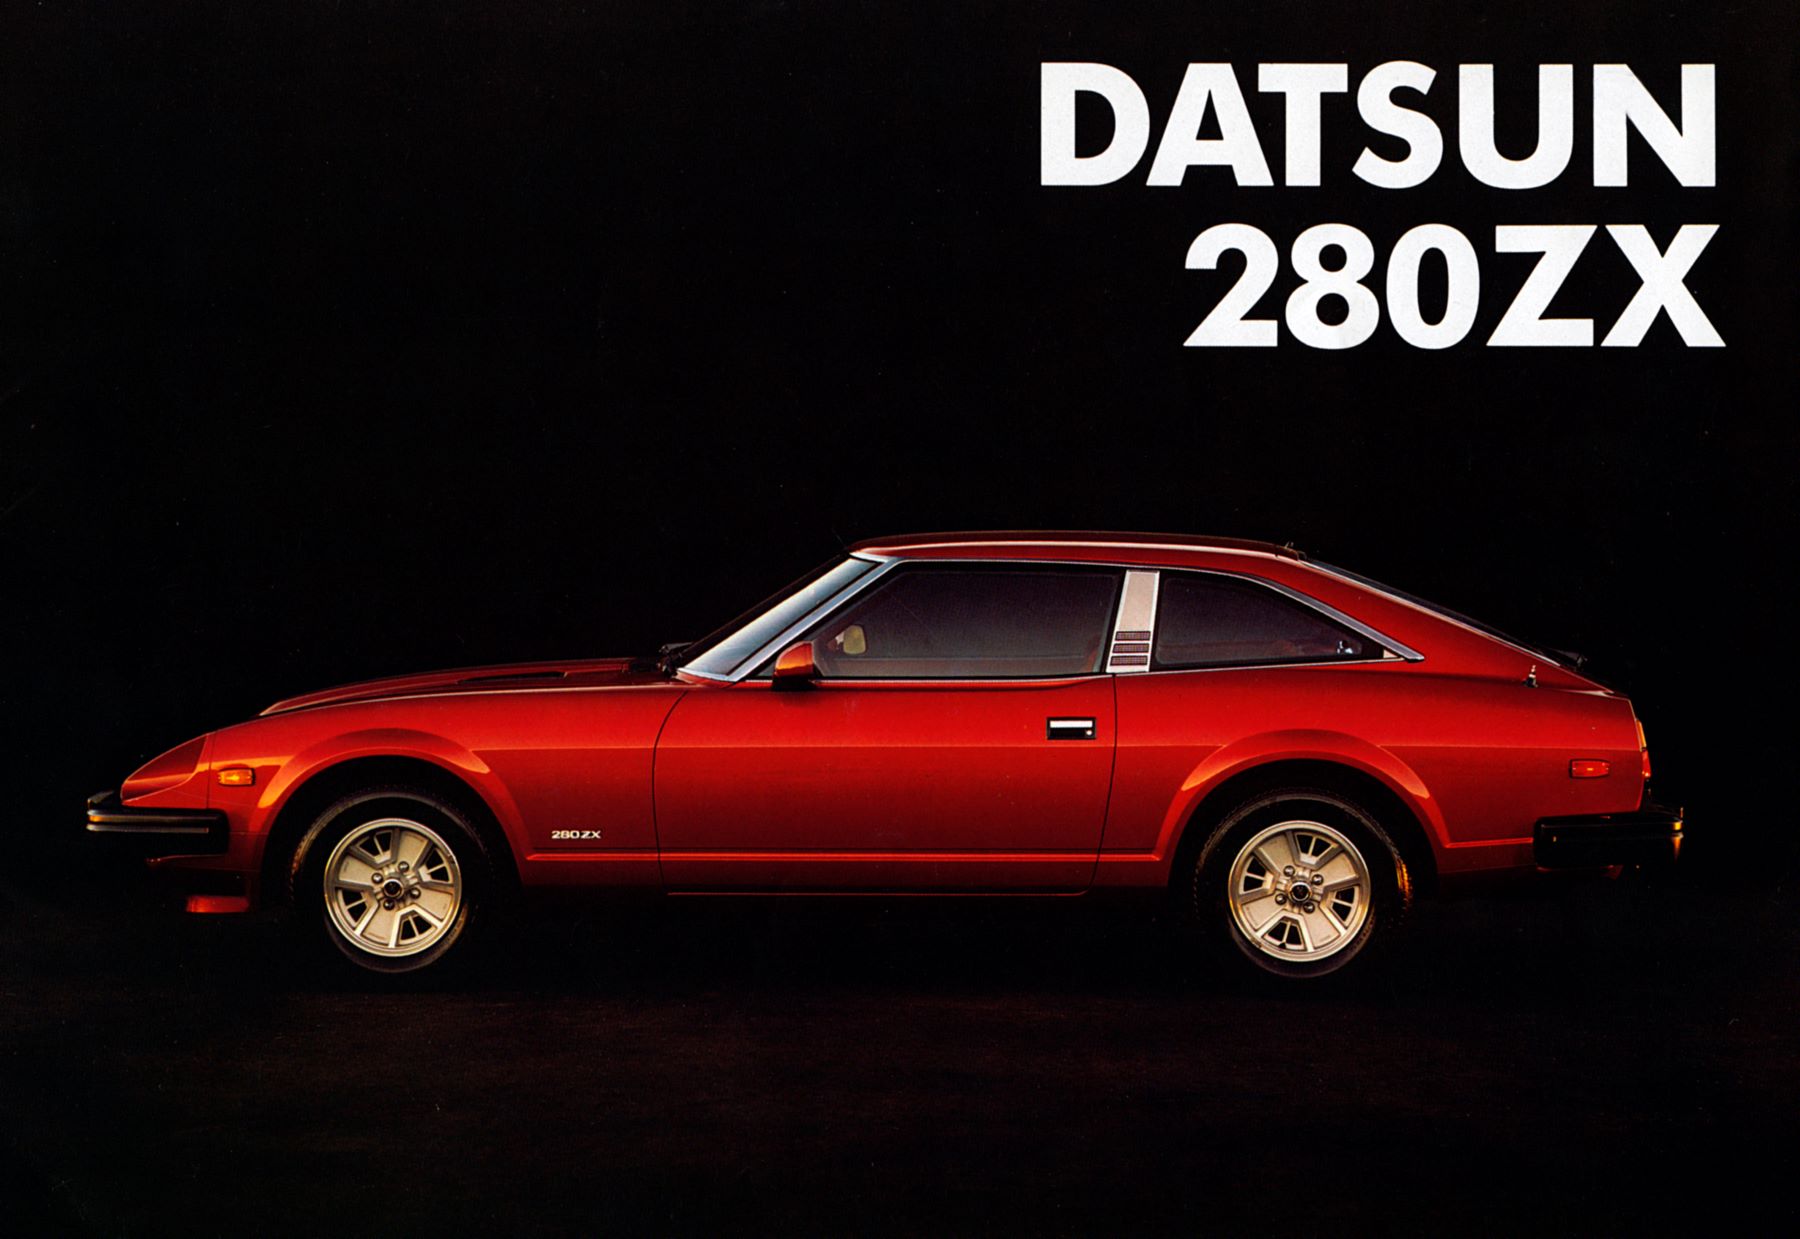 1981 Datsun 280ZX: This Totally '80s Coupe With Factory Colors Is 